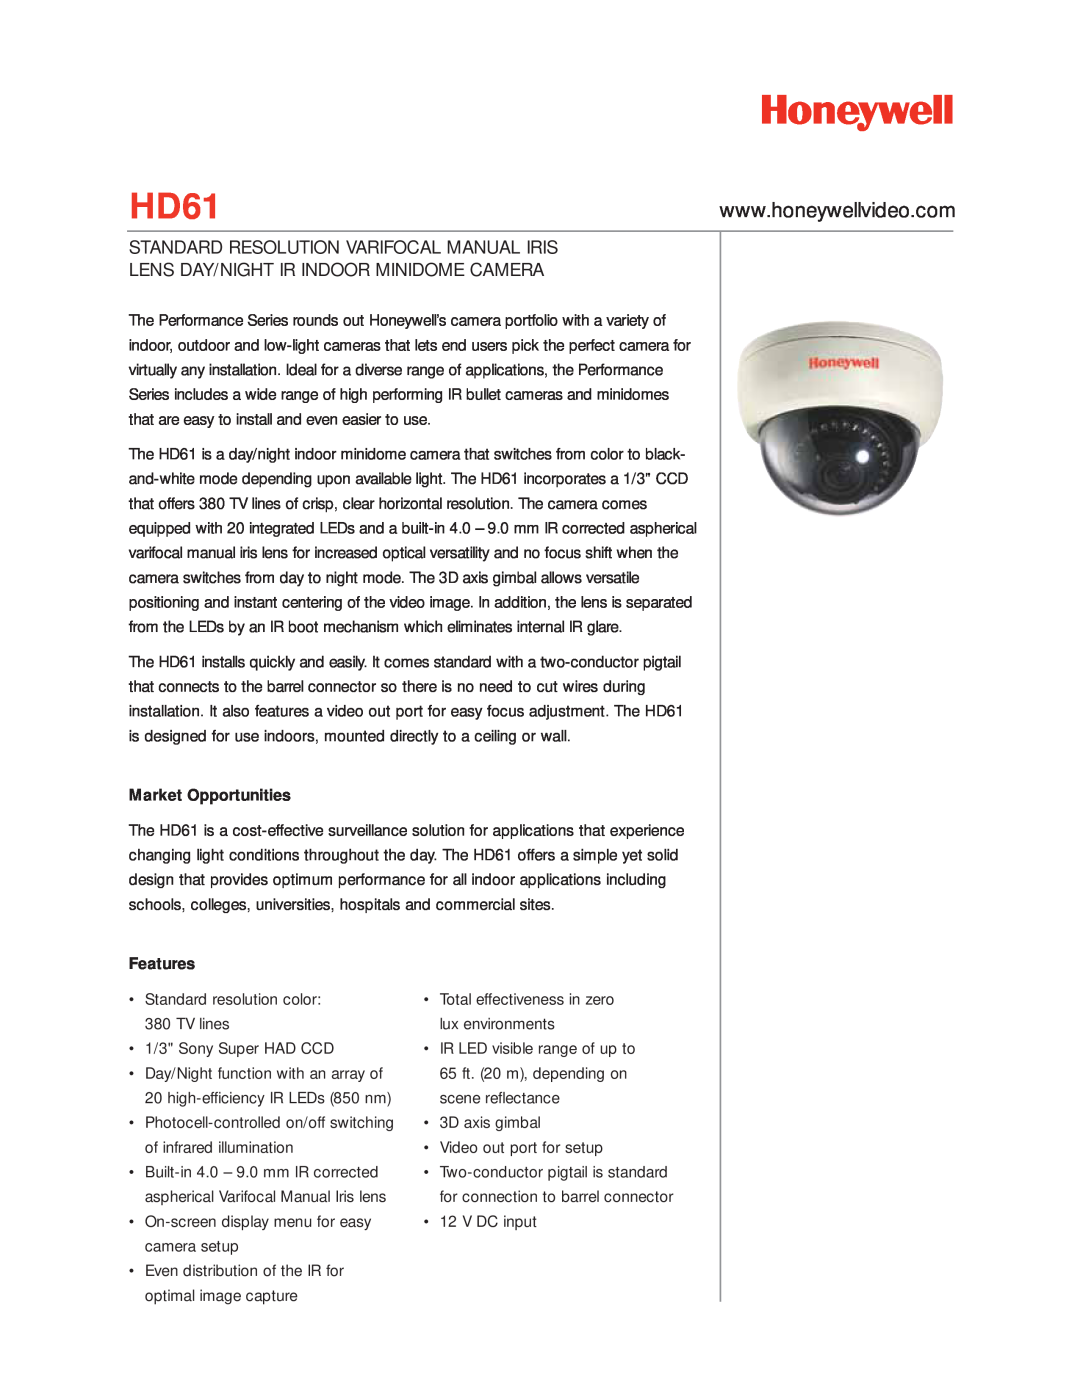 Honeywell operation manual HD61 Series, C Au T I O N, Color Dome Camera, User Information, Contents, Precautions, Axis 